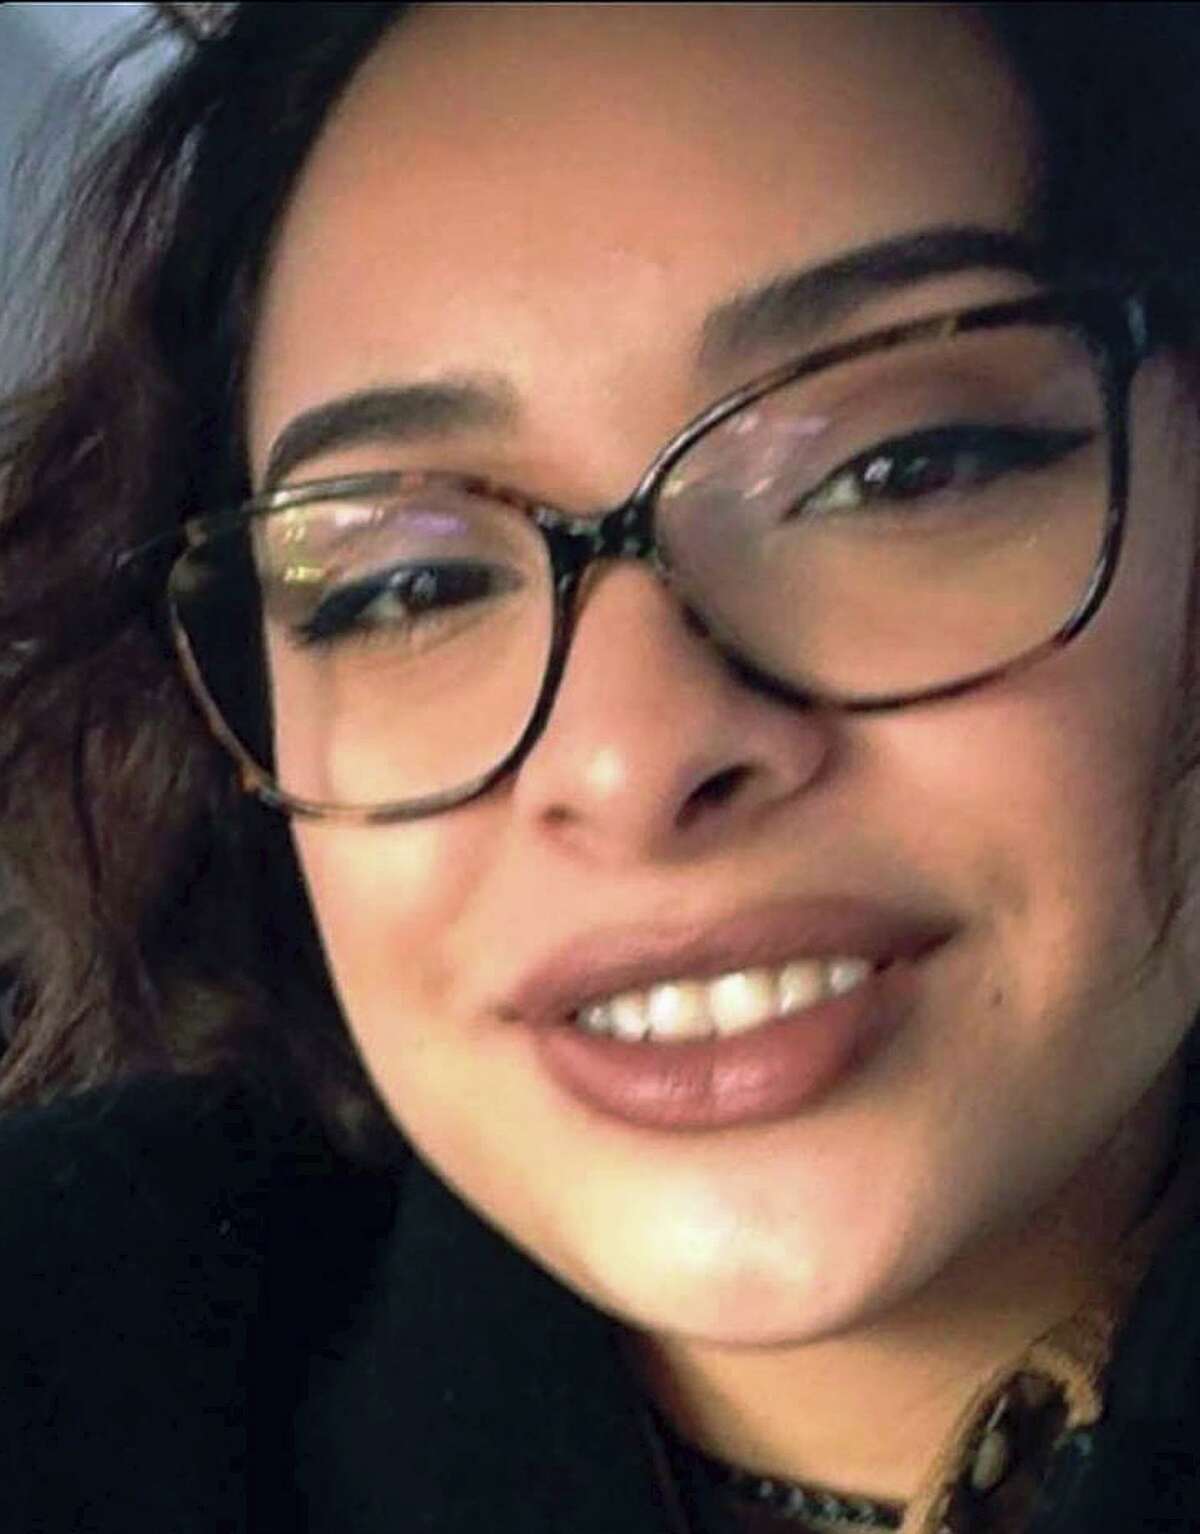 This undated photo provided by her family via the Greenwich Police Department shows Valerie Reyes, whose body was found inside a suitcase by highway workers on Tuesday, Feb. 6, 2019, in Greenwich, Conn.